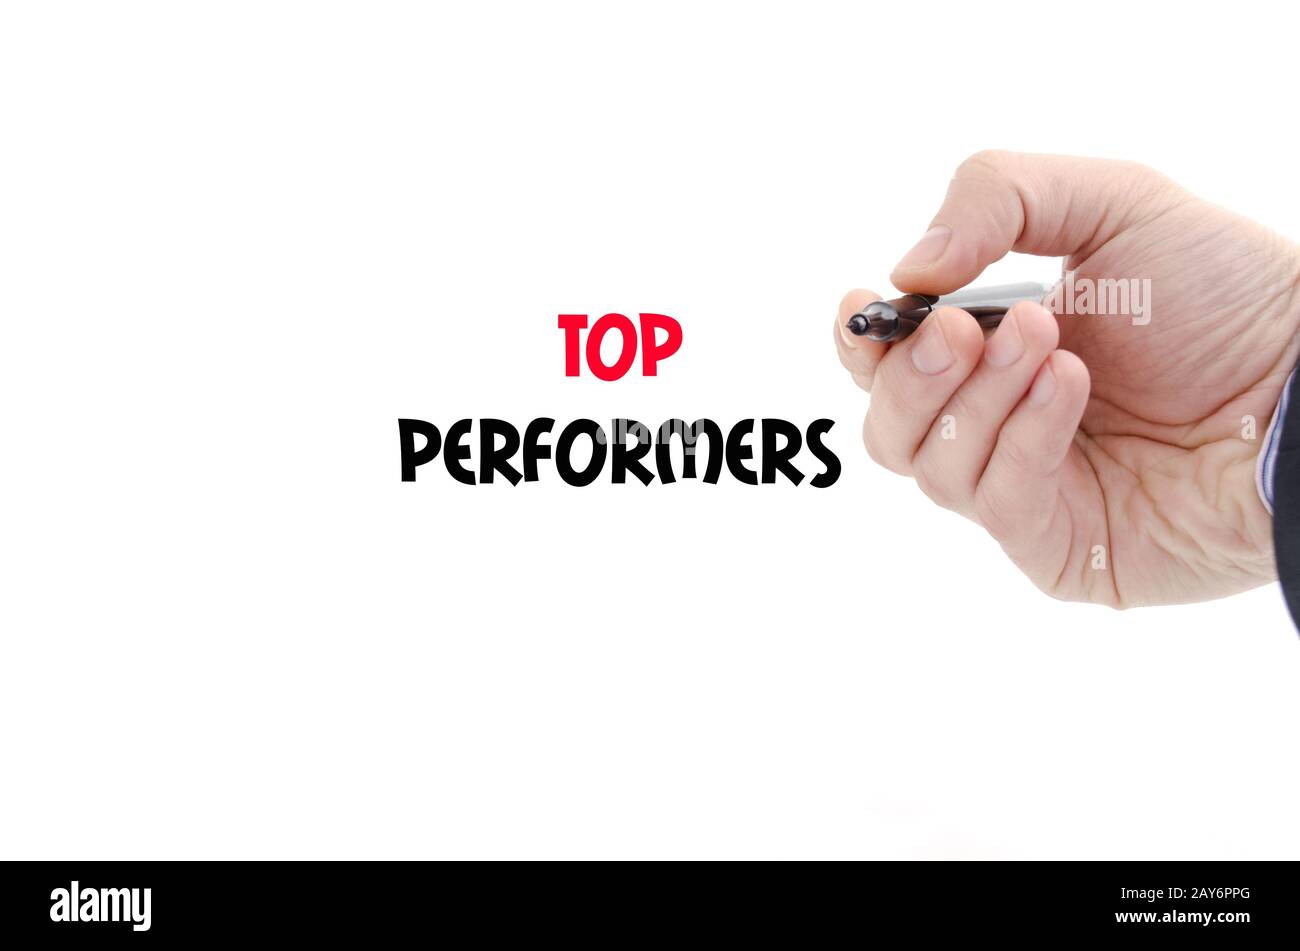 Top performers text concept Stock Photo